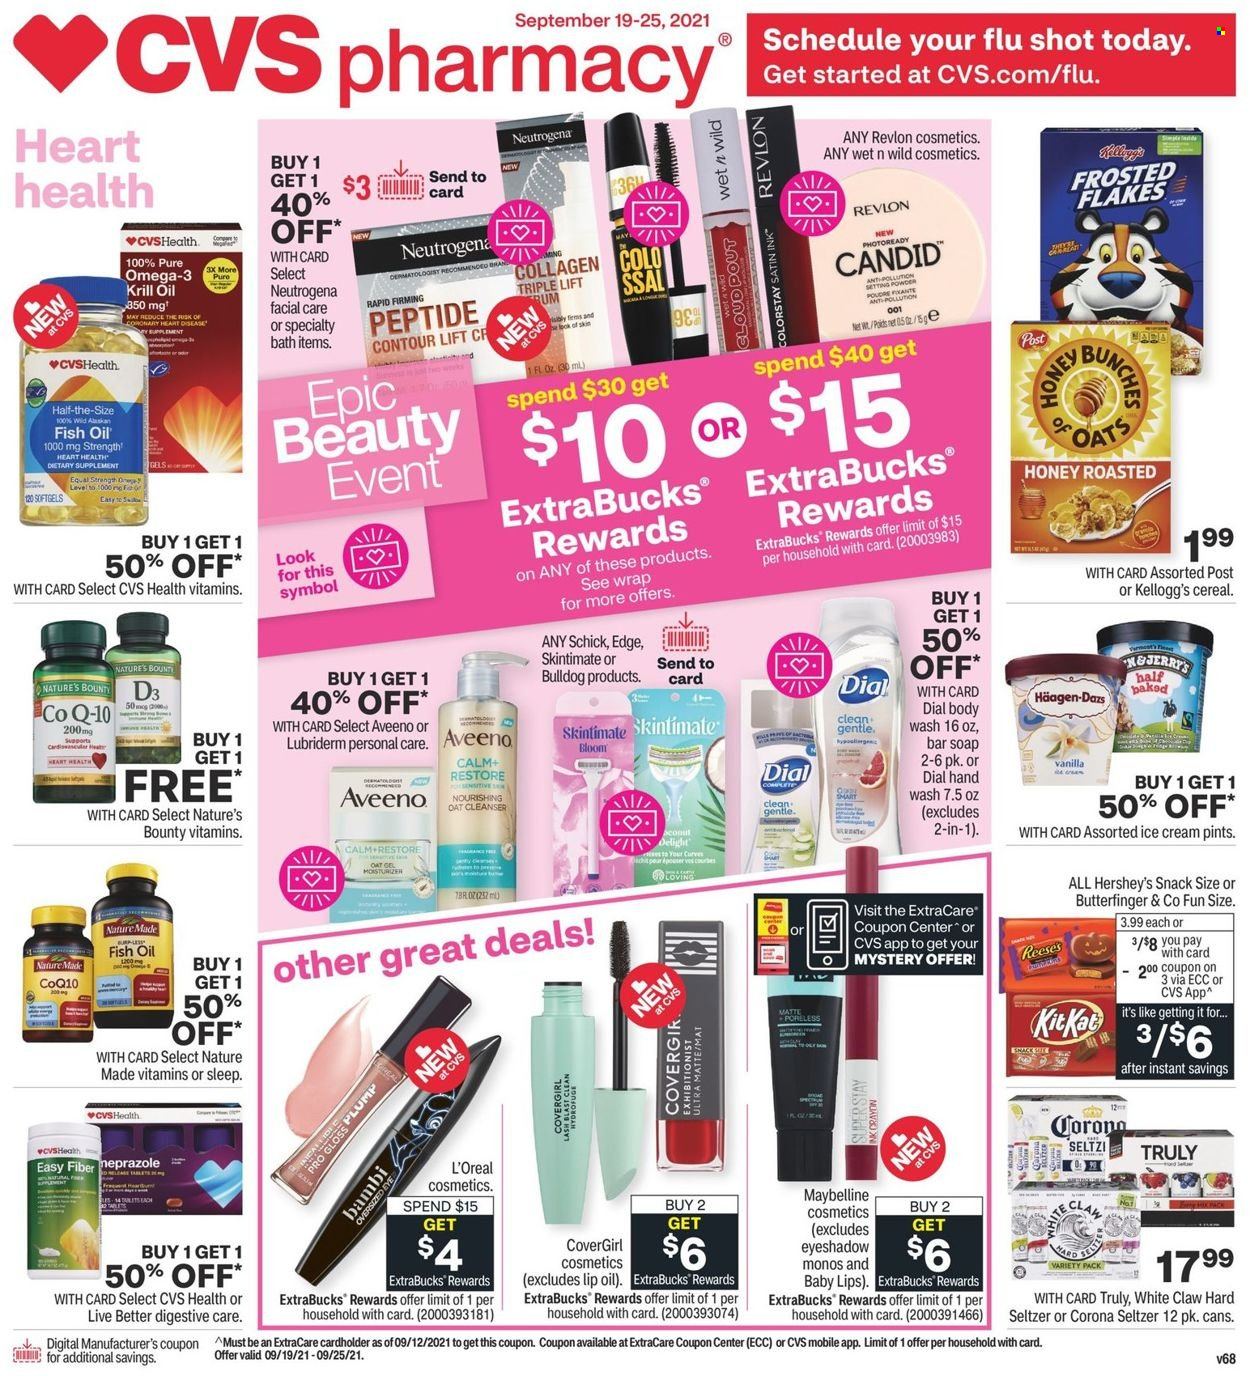 thumbnail - CVS Pharmacy Flyer - 09/19/2021 - 09/25/2021 - Sales products - ice cream, Reese's, Hershey's, Häagen-Dazs, snack, Kellogg's, cereals, oats, Frosted Flakes, rum, White Claw, Hard Seltzer, TRULY, Aveeno, body wash, hand wash, soap bar, Dial, soap, cleanser, L’Oréal, Neutrogena, Revlon, Lubriderm, Maybelline, Schick, fish oil, Nature Made, Nature's Bounty, Omega-3, vitamin D3, beer, Corona Extra, eyeshadow, contour. Page 1.